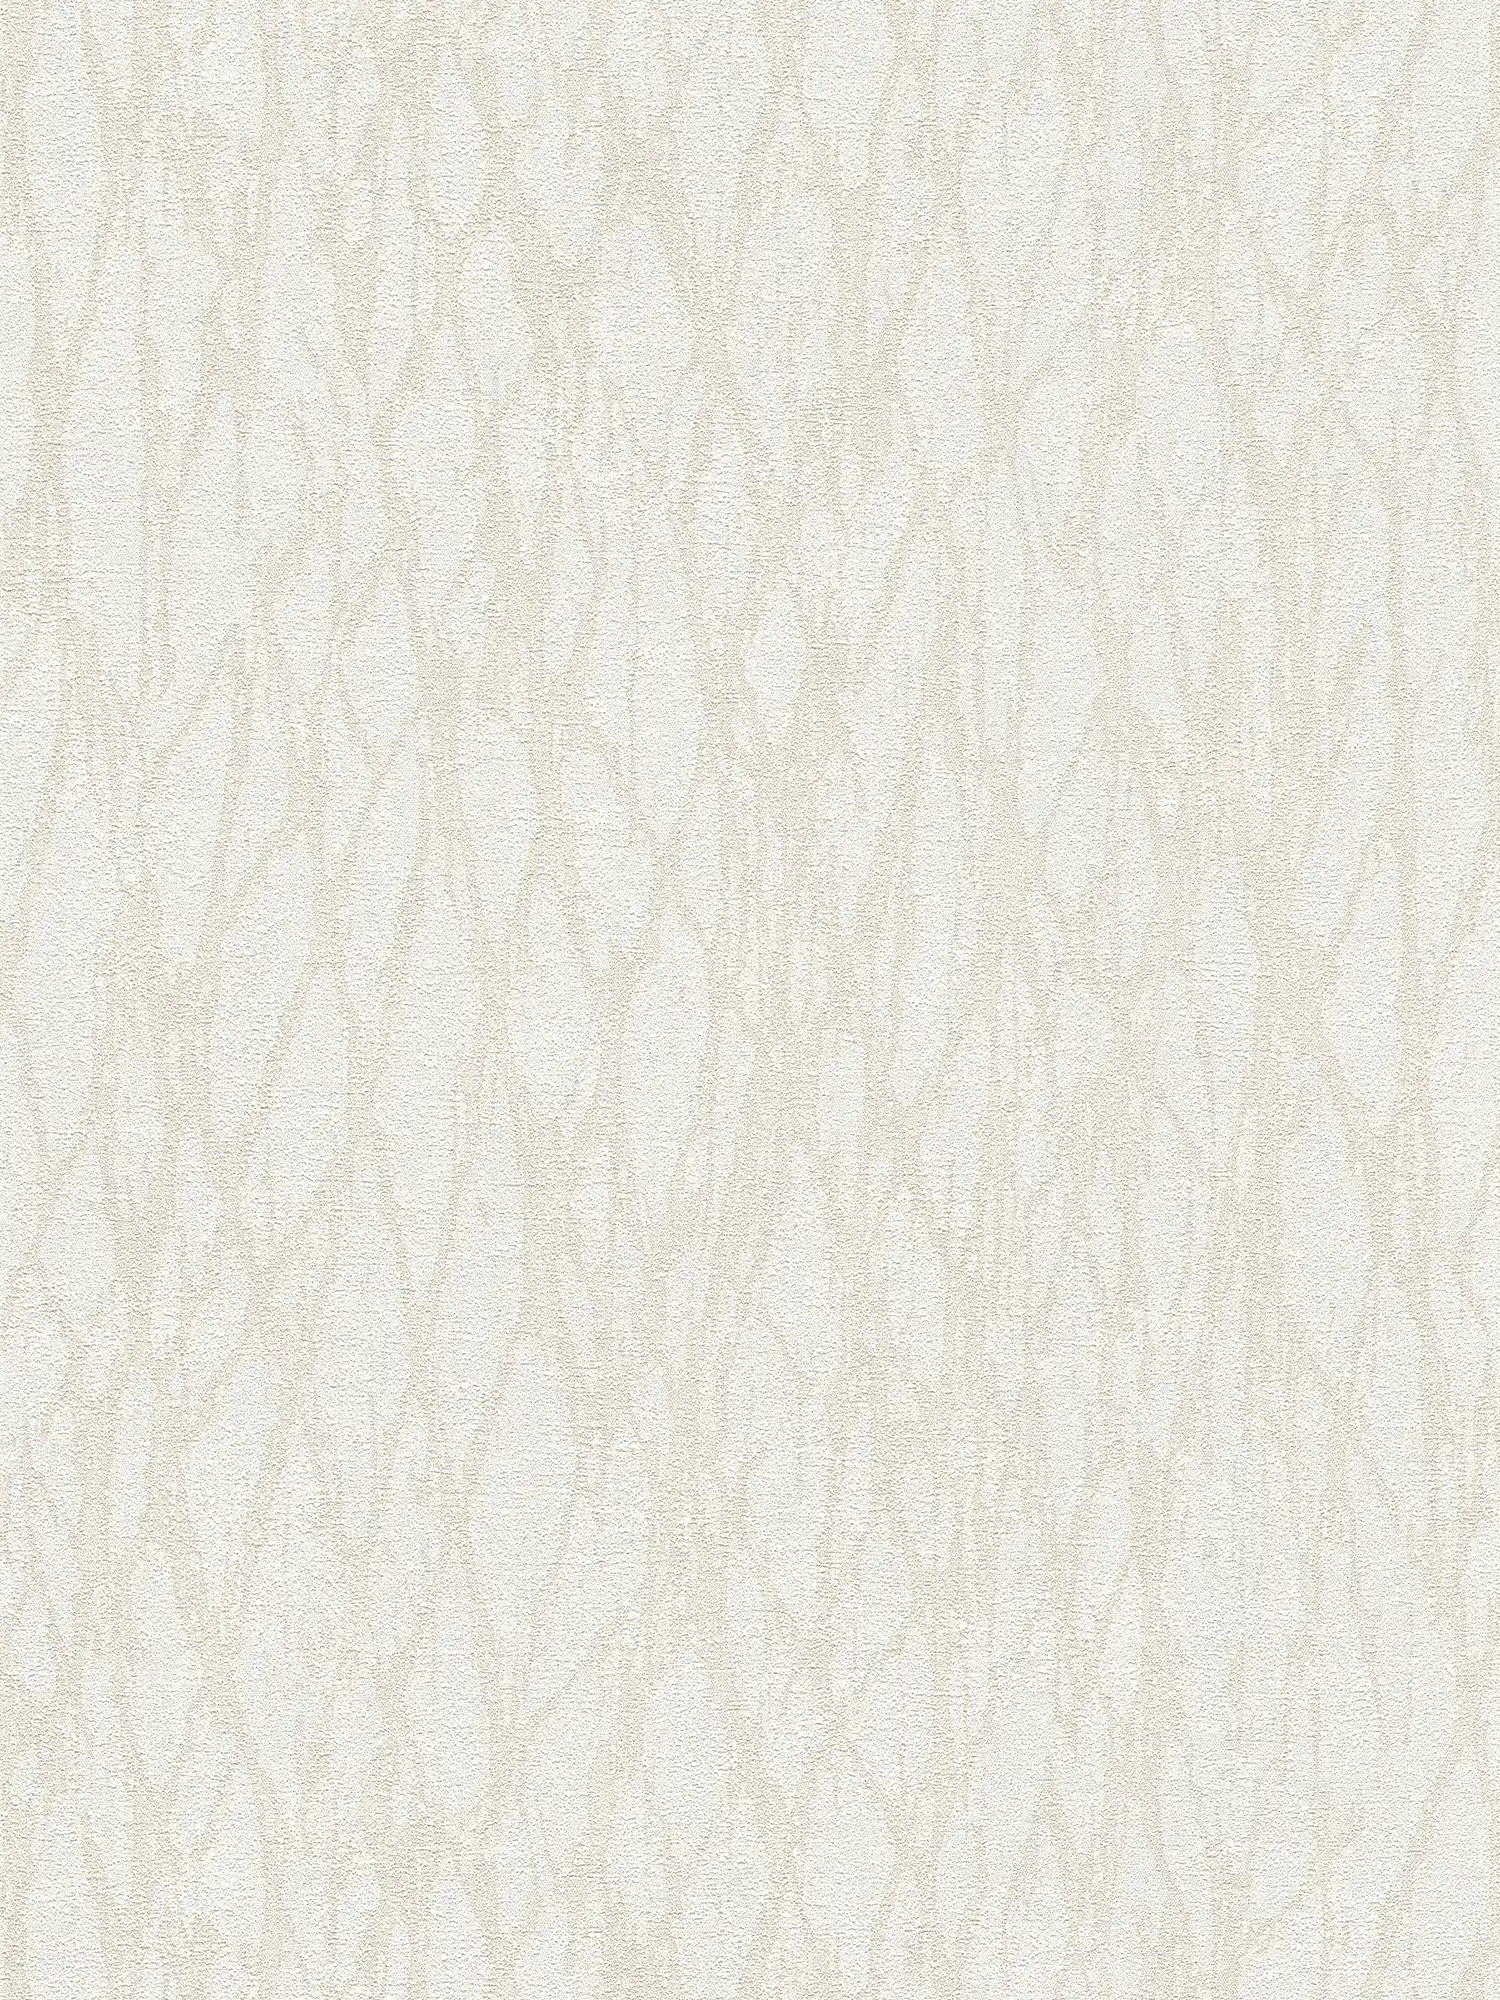 Non-woven wallpaper with abstract lines pattern - white, beige, cream
